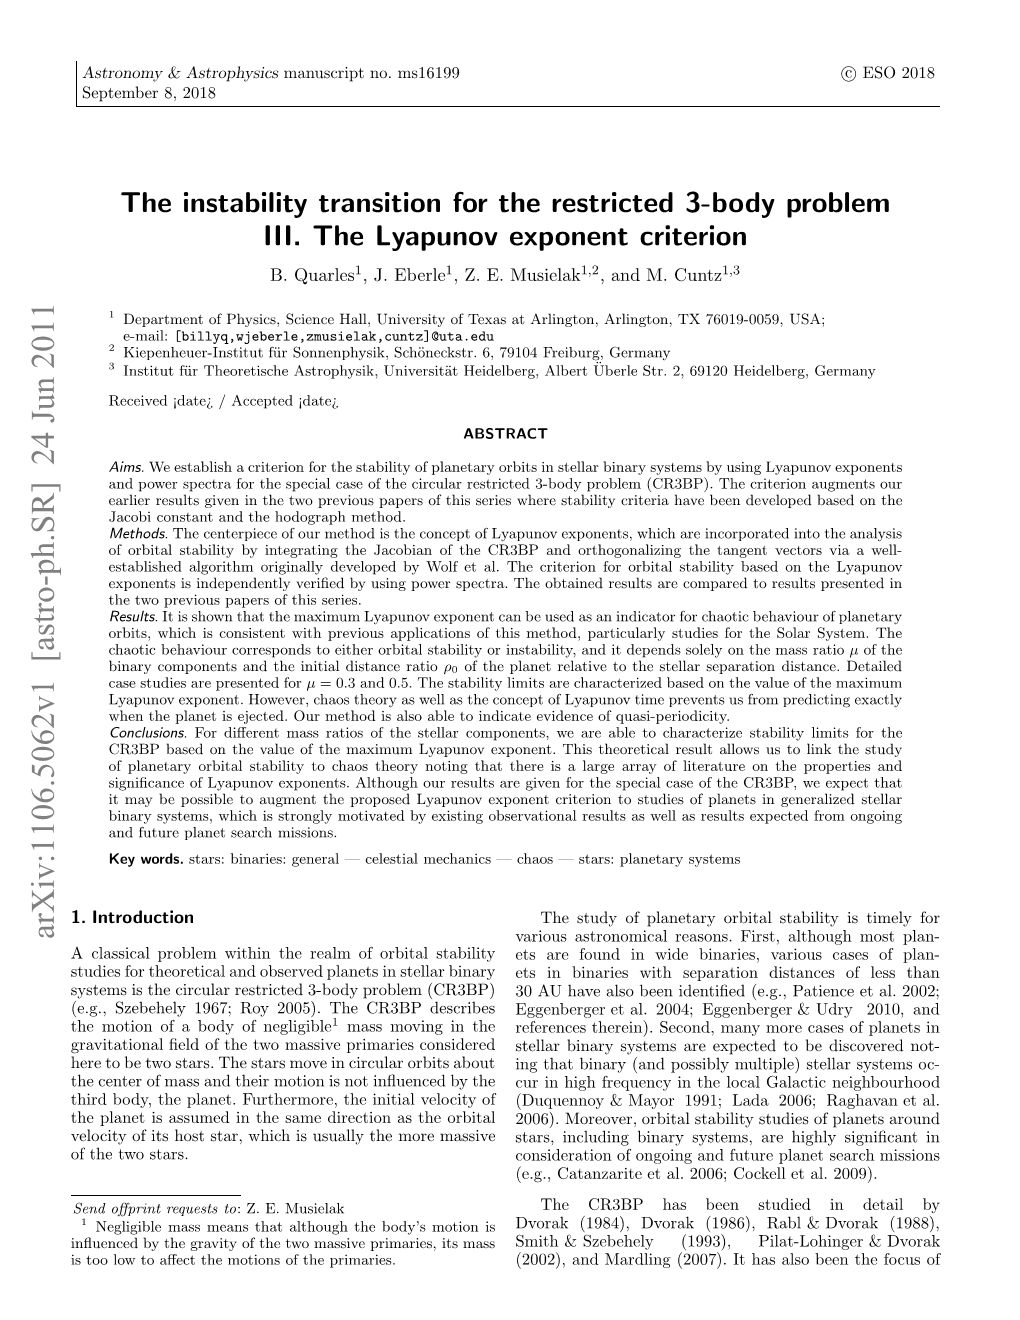 The Instability Transition for the Restricted 3-Body Problem. III. the Previous Papers in This Series